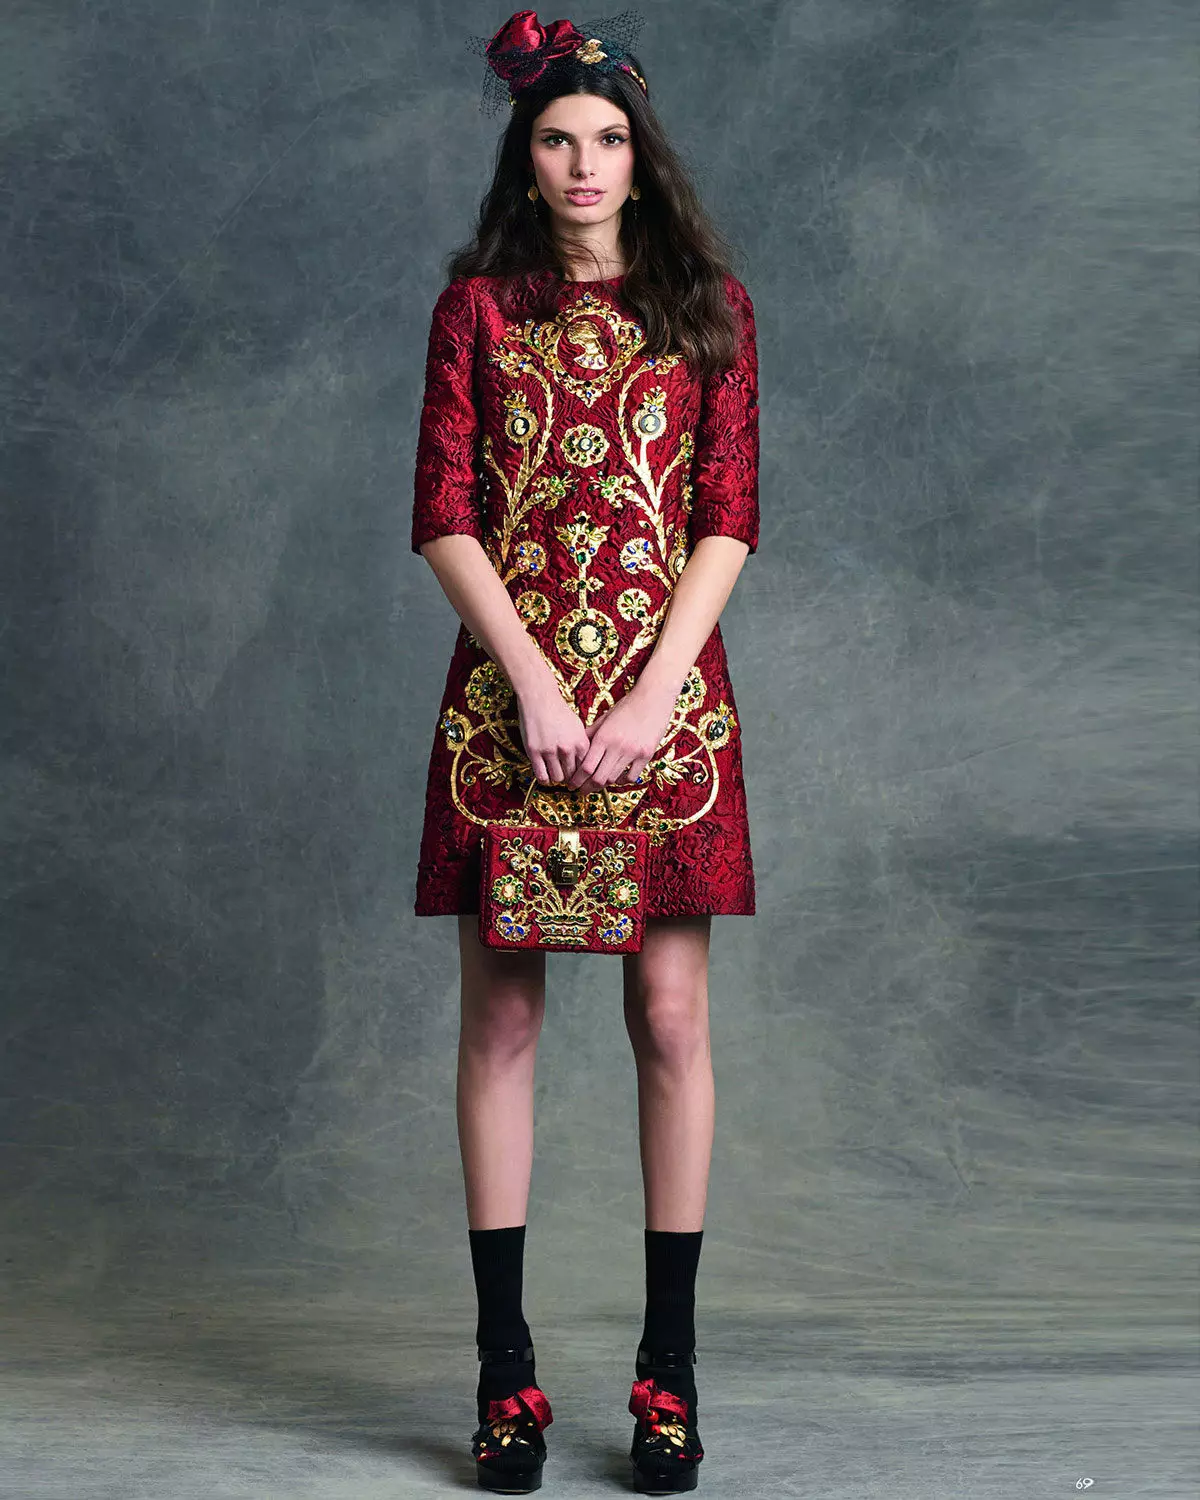 Cherry dress with gold embroidery